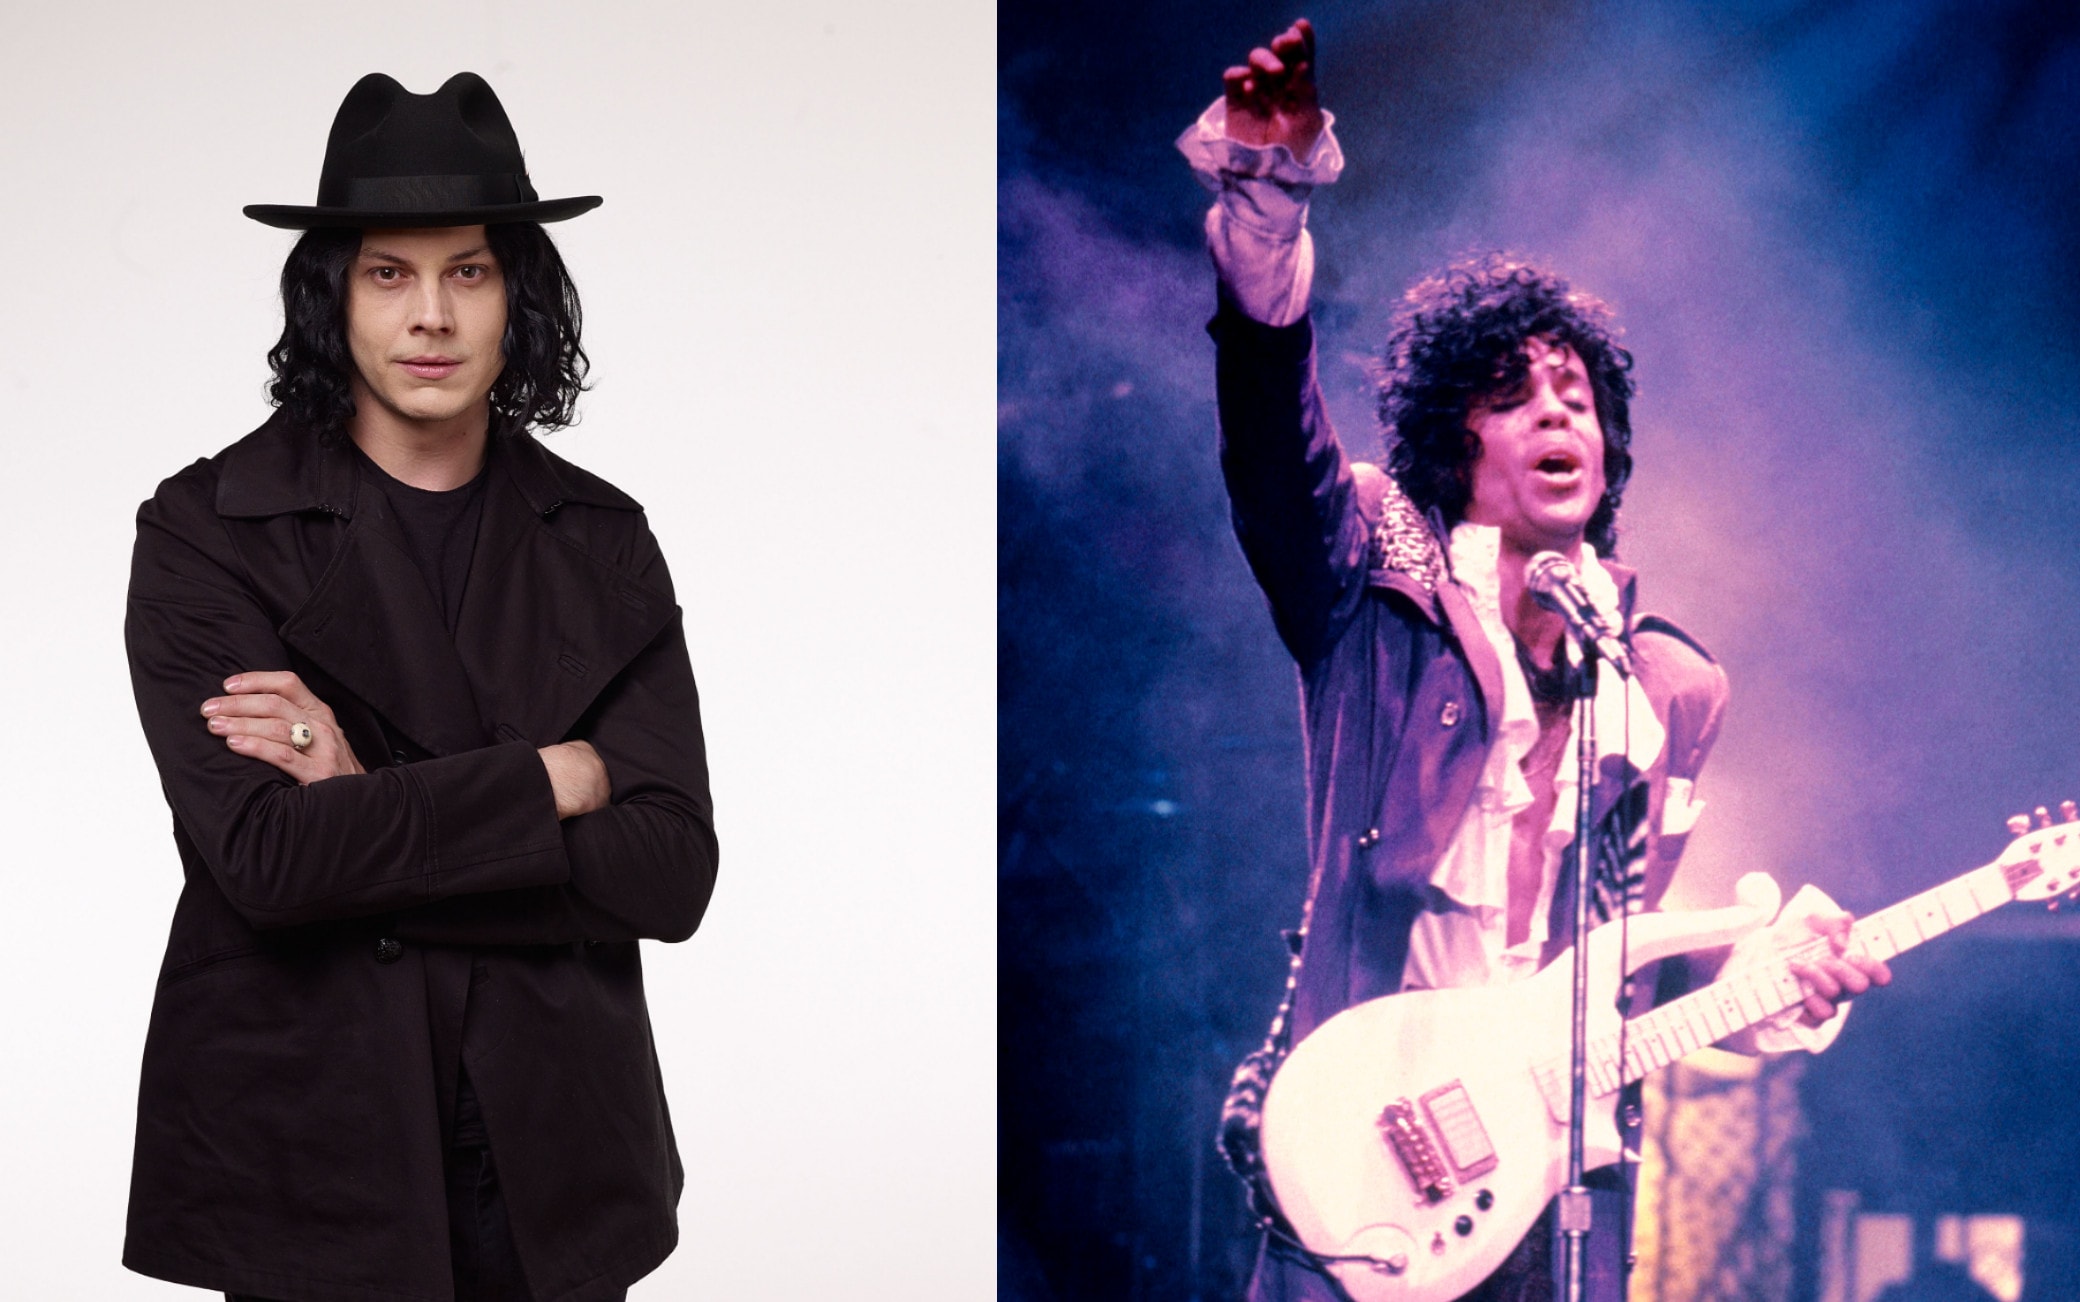 Thanks to Jack White, Prince’s album “Camille” will be released